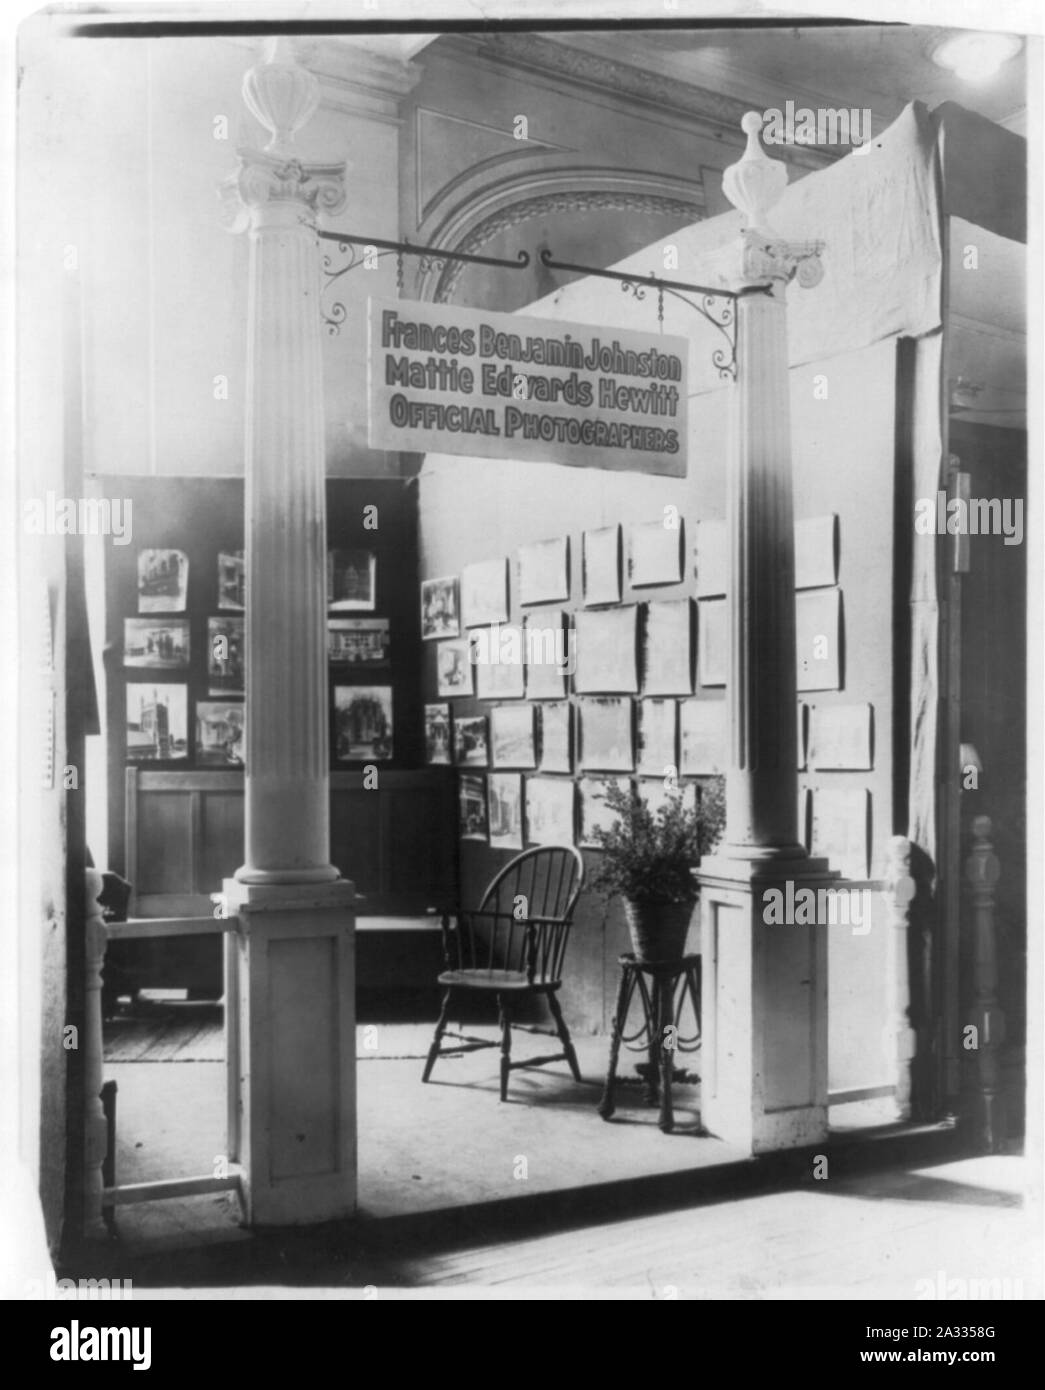 Exhibit display area for architectural photographs by ‘Frances Benjamin Johnston, Mattie Edwards Hewitt, Official Photographers‘ Stock Photo